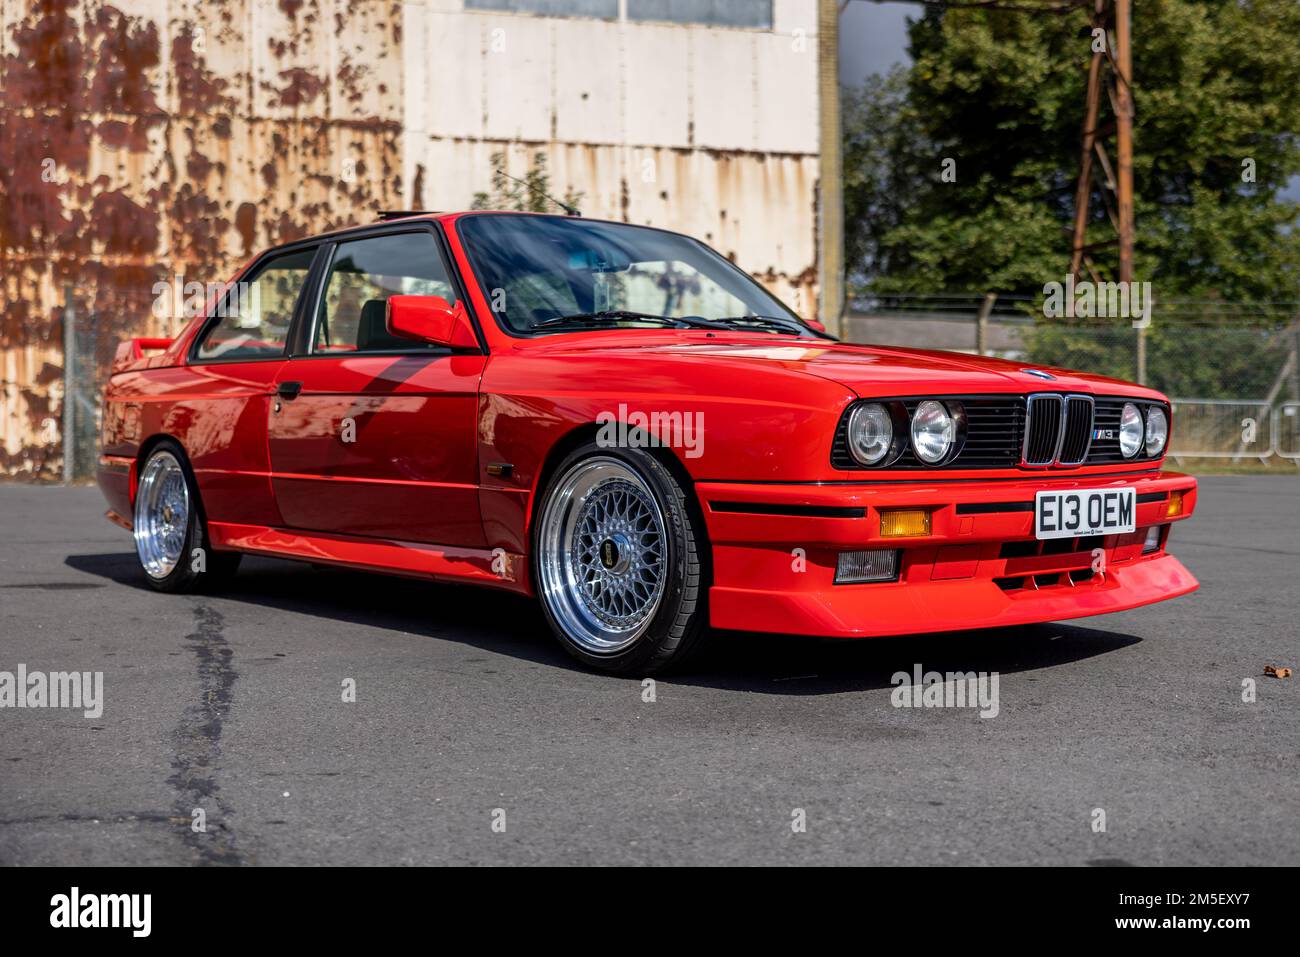 1991 BMW M3 ‘E13 OEM’ on display at the Bicester Heritage Scramble celebrating 50 years of BMW M motorsport division. Stock Photo